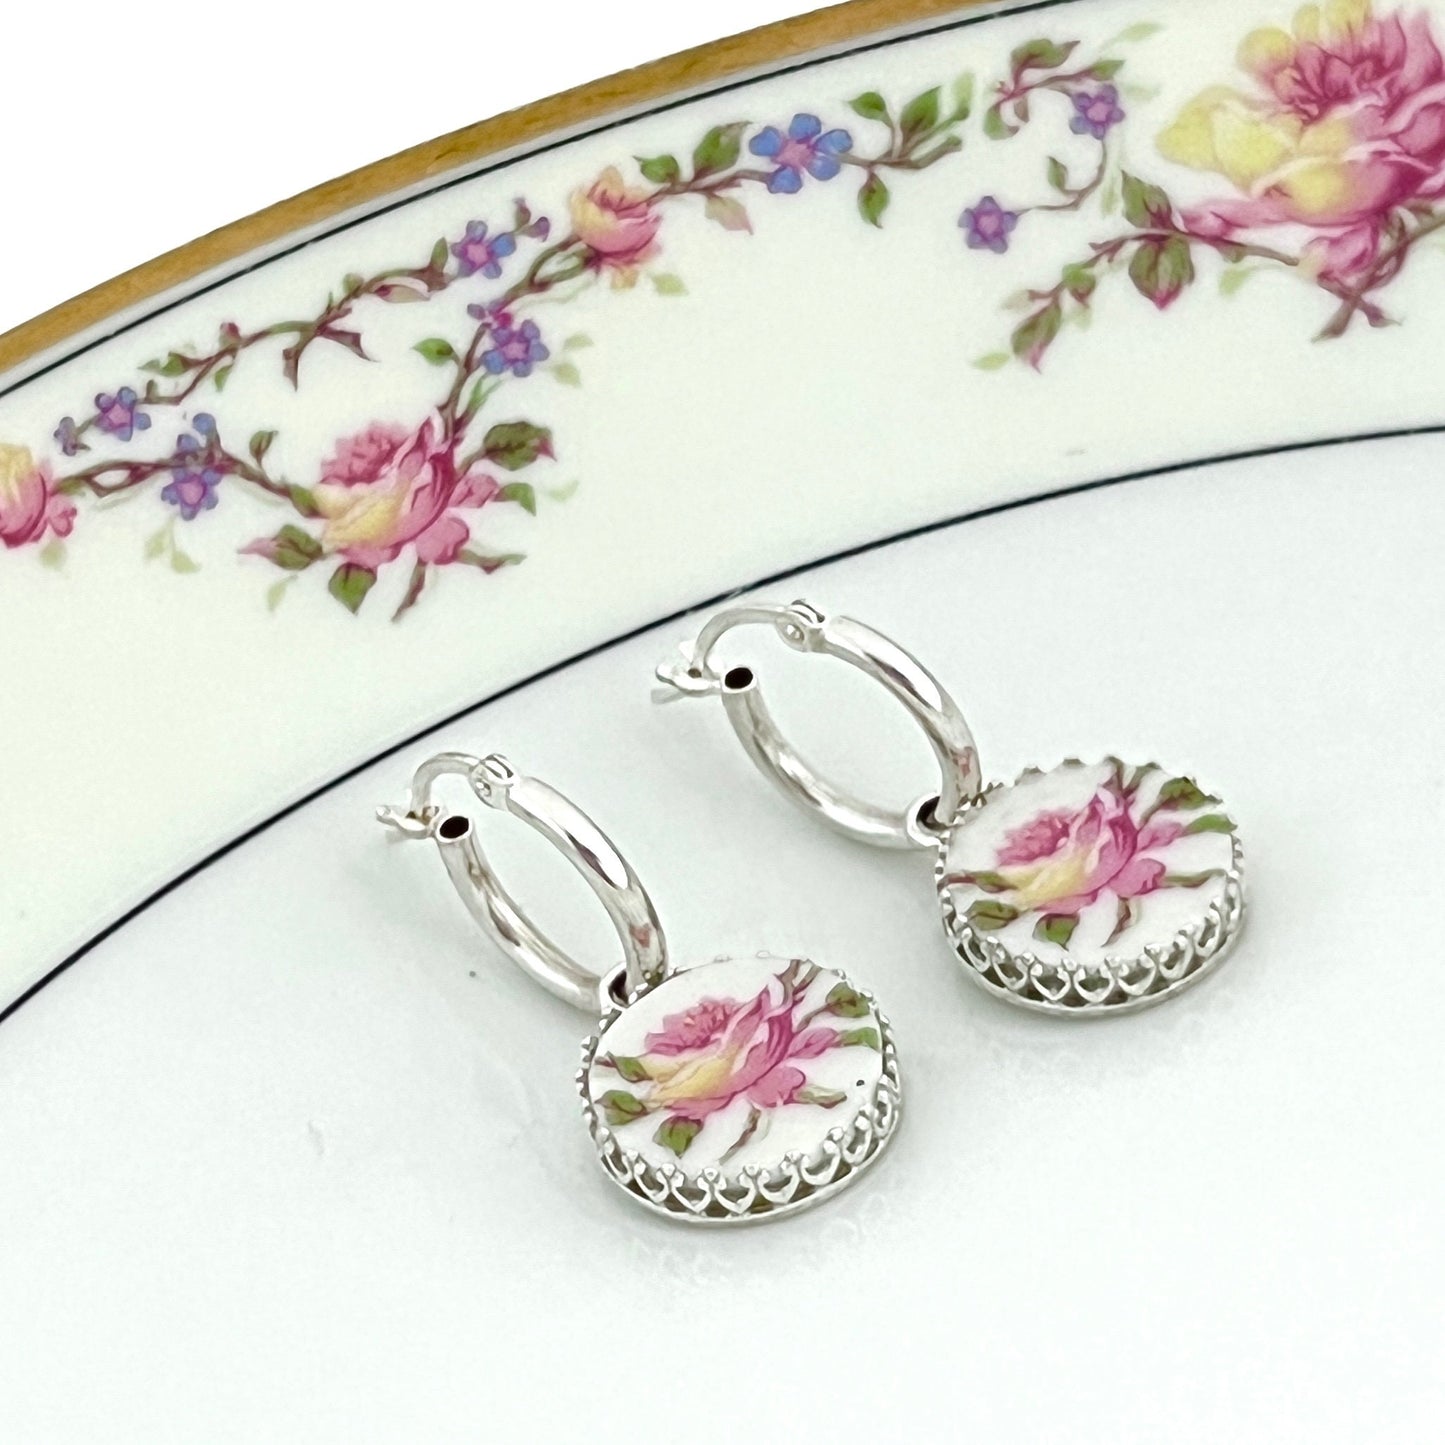 Dainty French Limoges China Hoop Earrings, Unique Birthday Gift for Wife, Broken China Jewelry